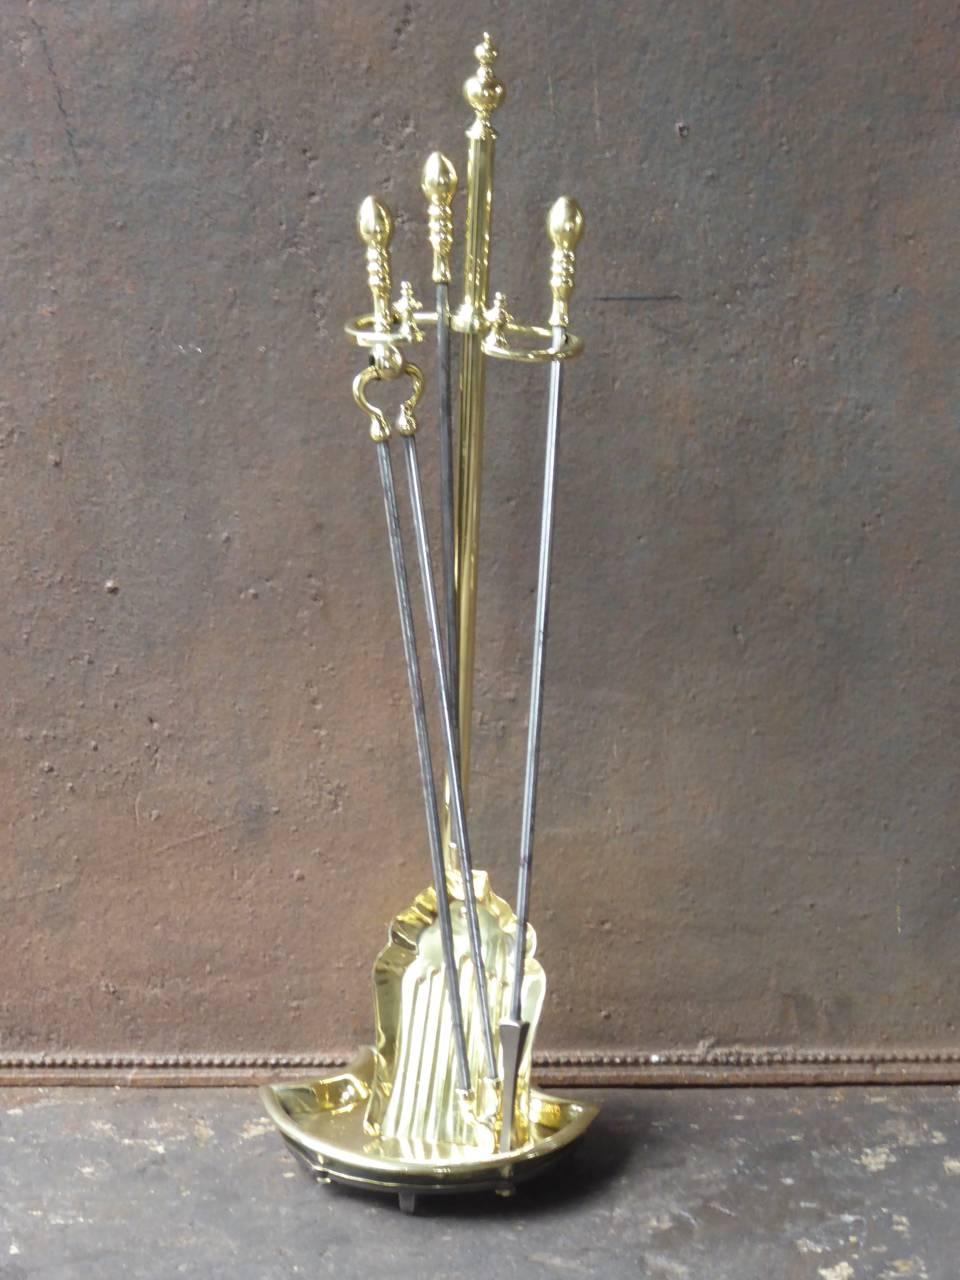 19th century English fireplace tool set - fire irons made of polished brass and polished steel.